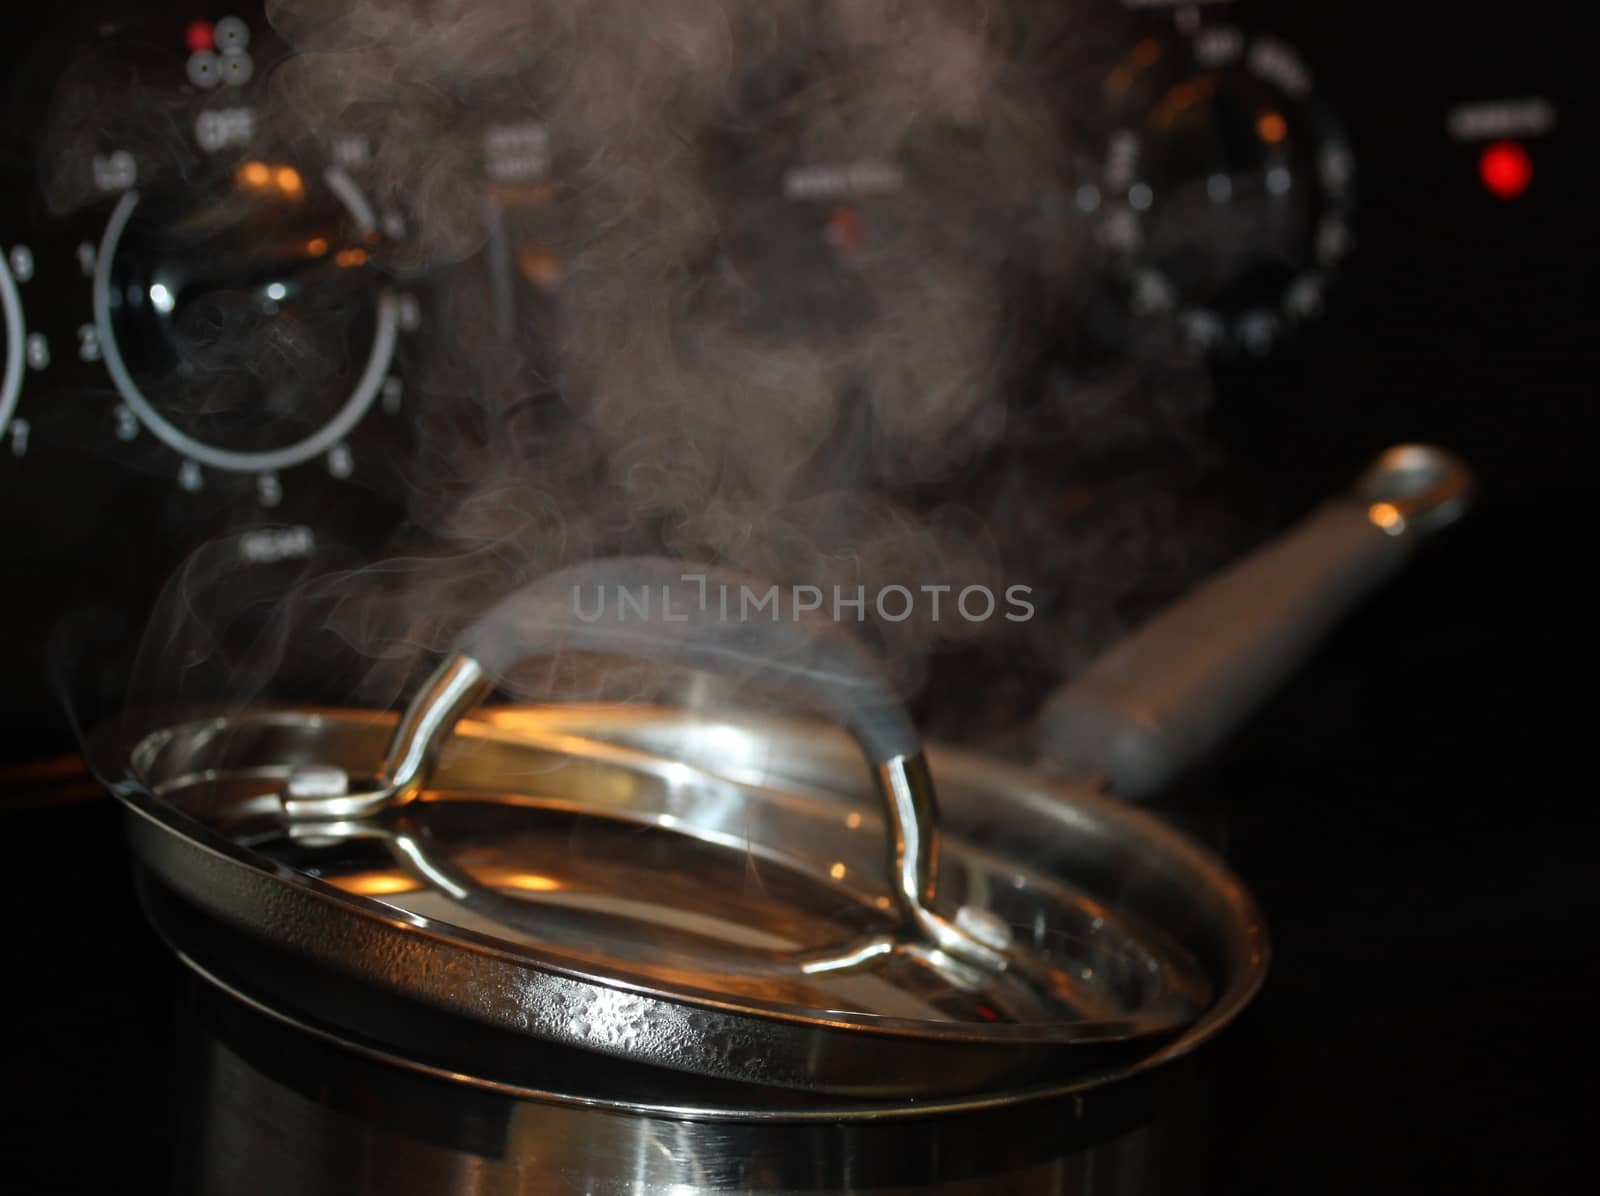 Steam coming out of boiling pot on the hot stove.